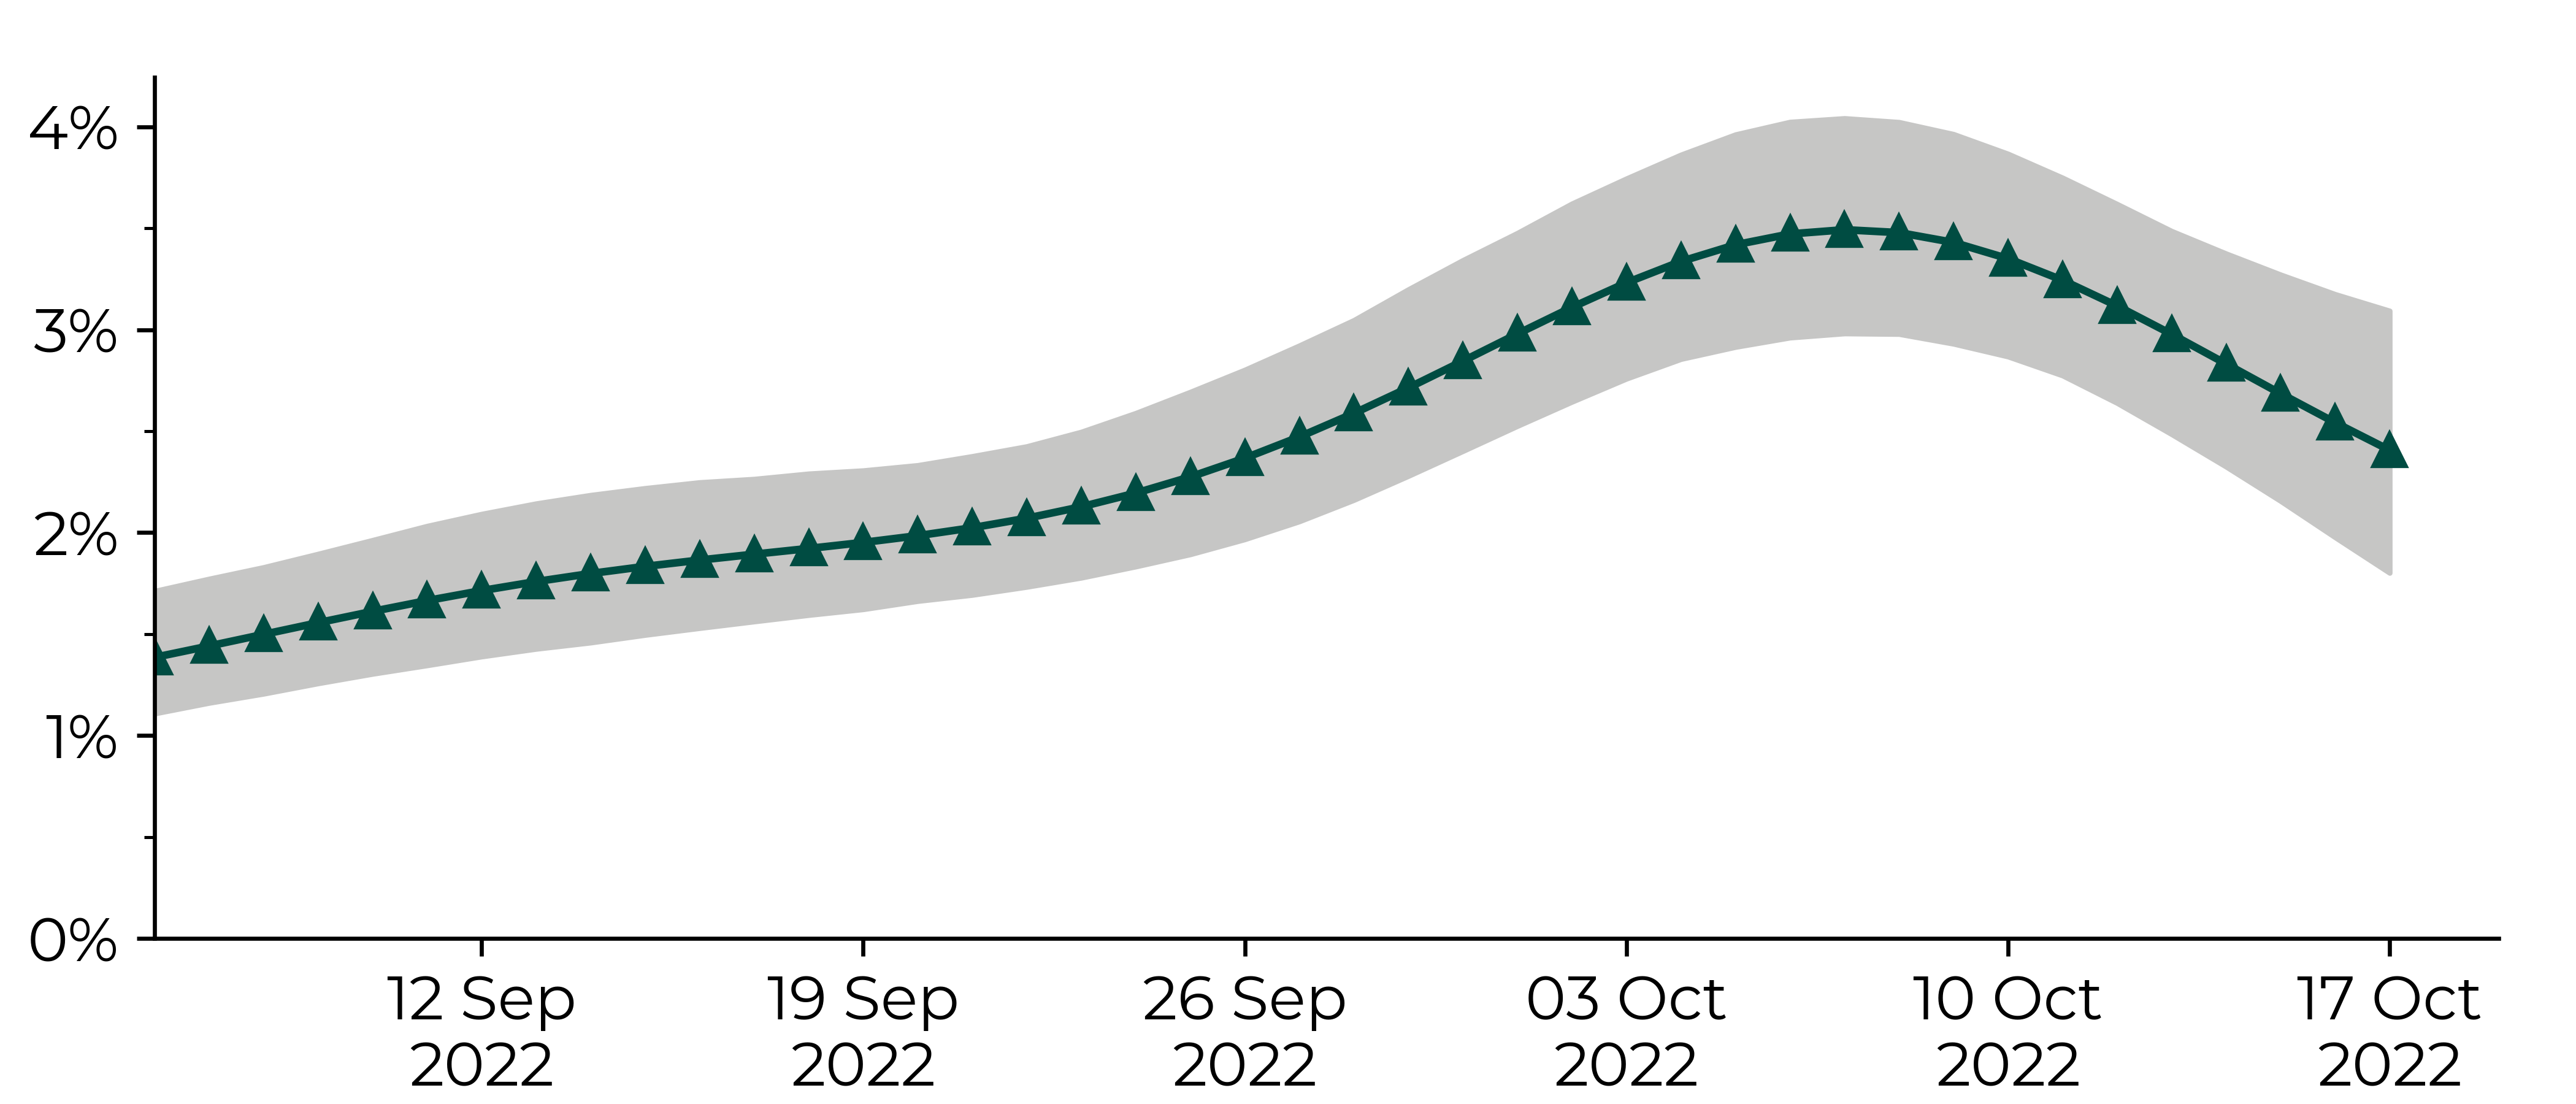 The graph shows a steady increase from 1.4% on 6 September 2022 to 3.5% on 7 October 2022. This was followed by a decrease to 2.4% on 17 October 2022 – the latest data available. The width of the 95% credible interval is about one percentage point.